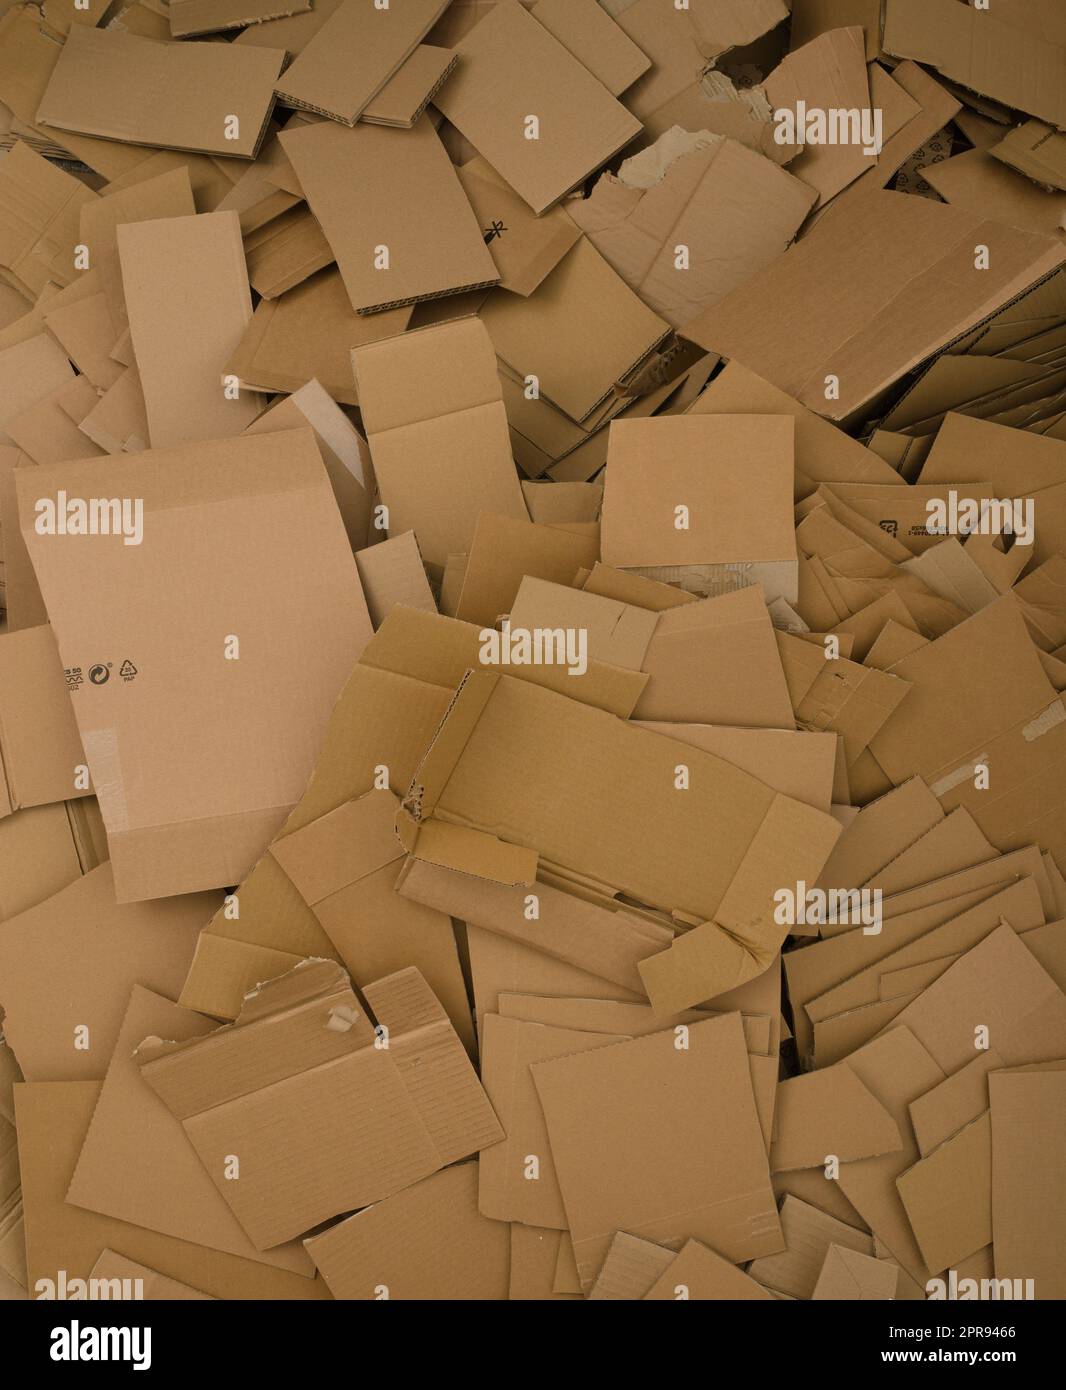 A lot of cut cardboard lying in a large pile. Photo shows the amount of the waste generated by the cardboard packaging. Stock Photo